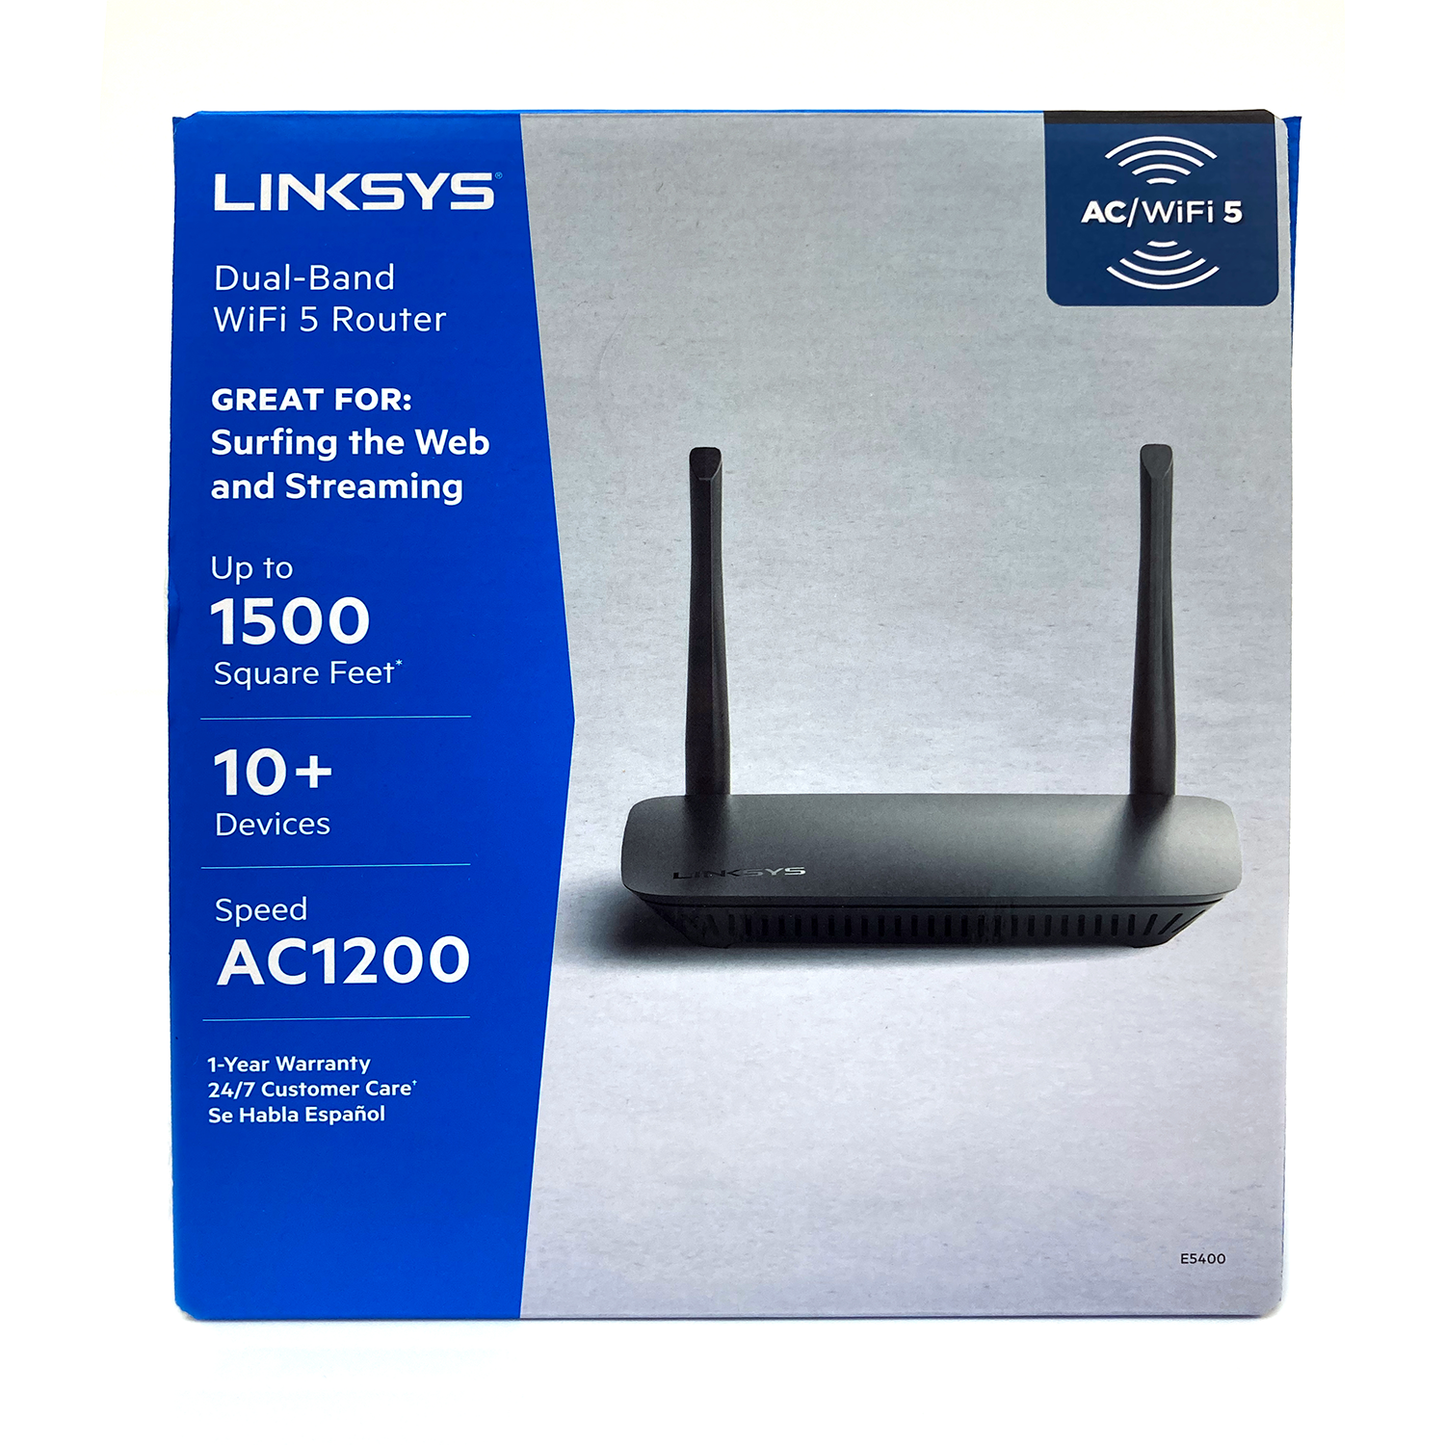 The Linksys Dual-Band WiFi 5 Router comes setup for use to work with Pennsylvania Skill Ticket Redemption Terminals (TRTs) and/or to link to Pennsylvania Skill Games.